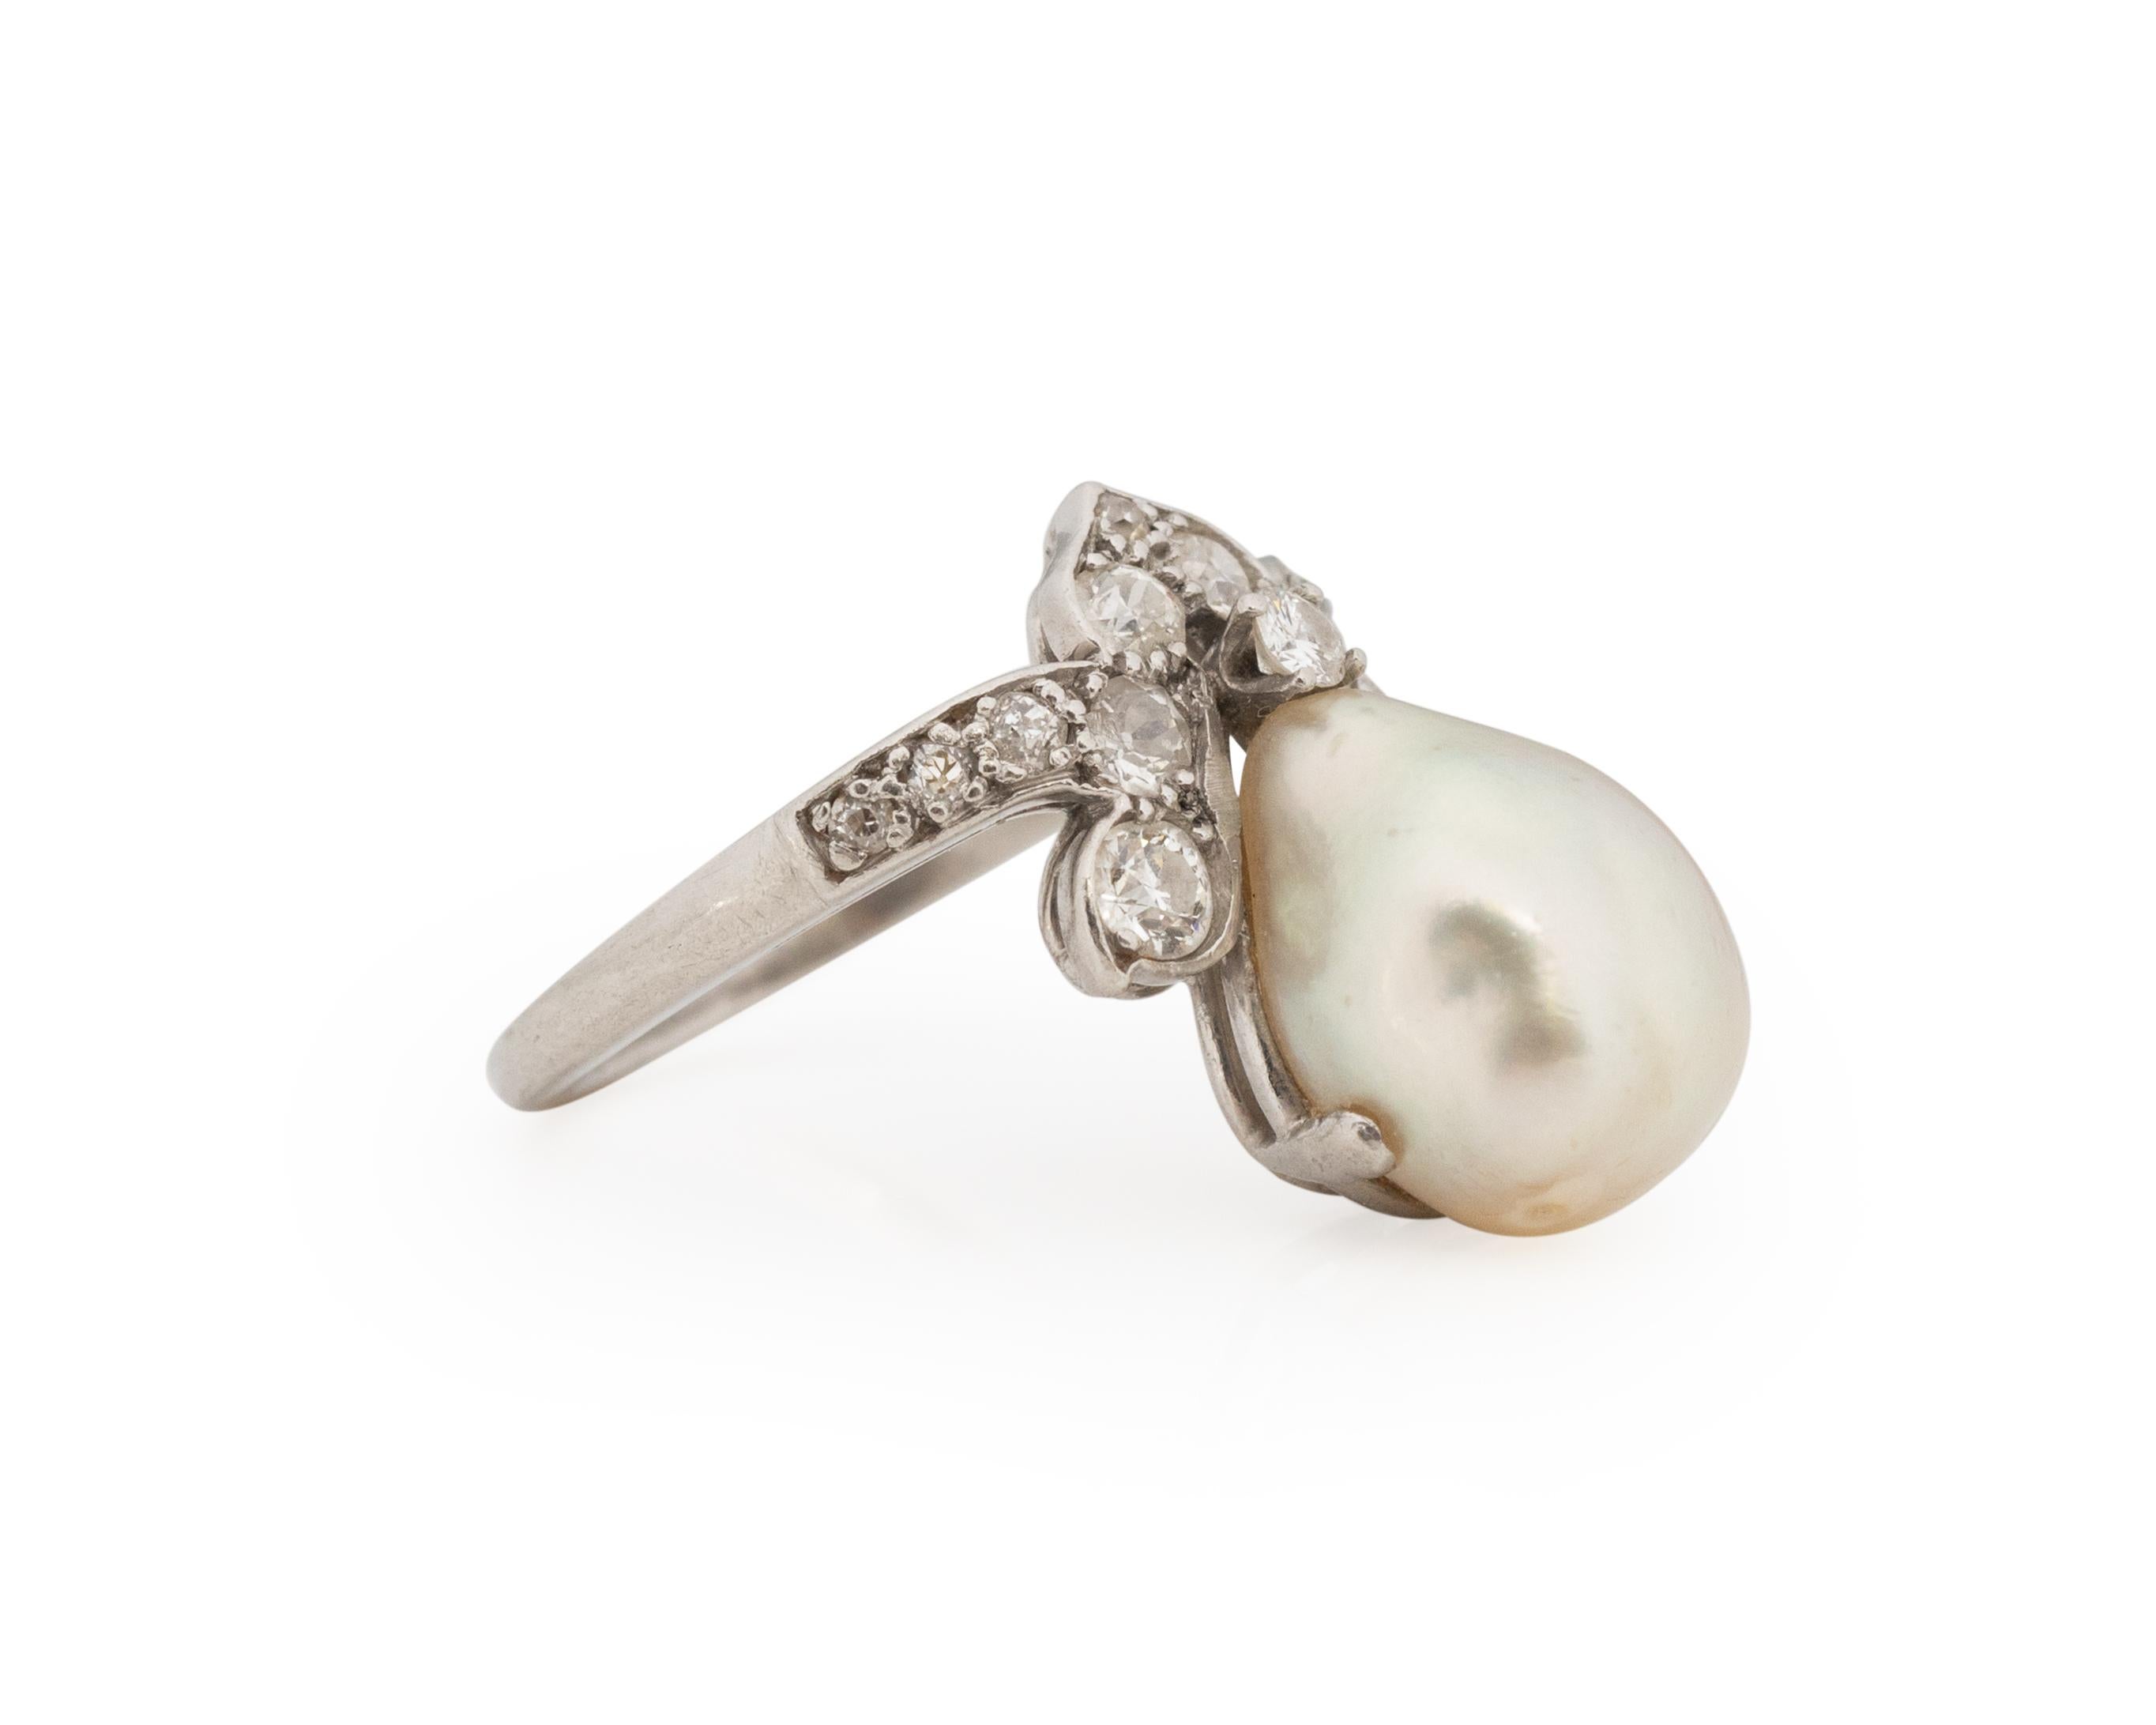 Ring Size: 4
Metal Type: Platinum [Hallmarked, and Tested]
Weight: 3.5 grams

Center Pearl Details:
GIA REPORT #: 5221026434
Weight: 2.50carat (Estimated)
Cut: Drop Pear
Measurements: 8.99mm x 8.78mm

Side Stone Details:
Weight: .45carat, total